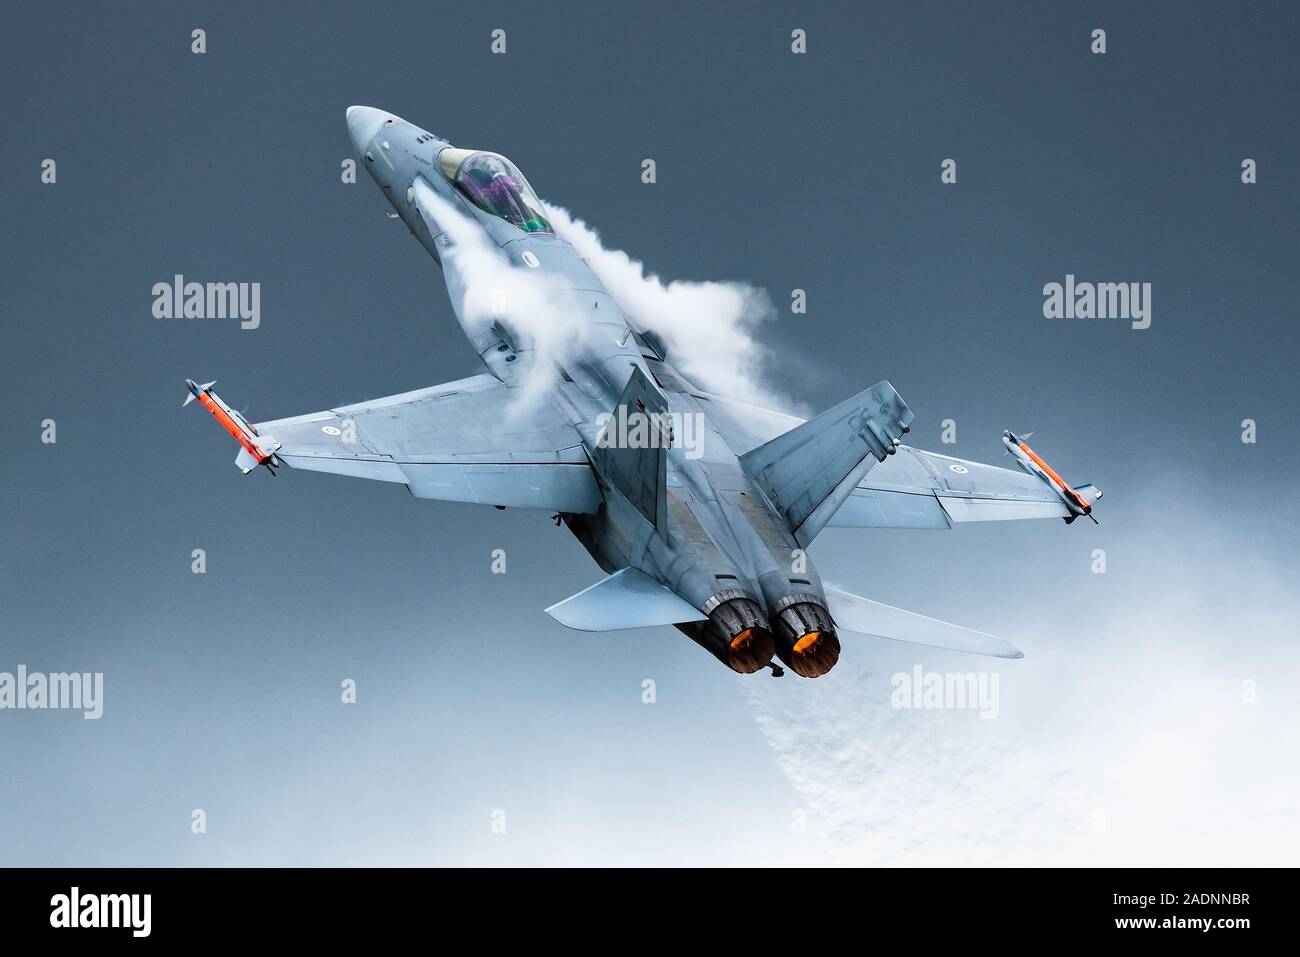 A McDonnell Douglas F/A-18 Hornet twin-engine fighter jet of the Finnish Air Force. Stock Photo